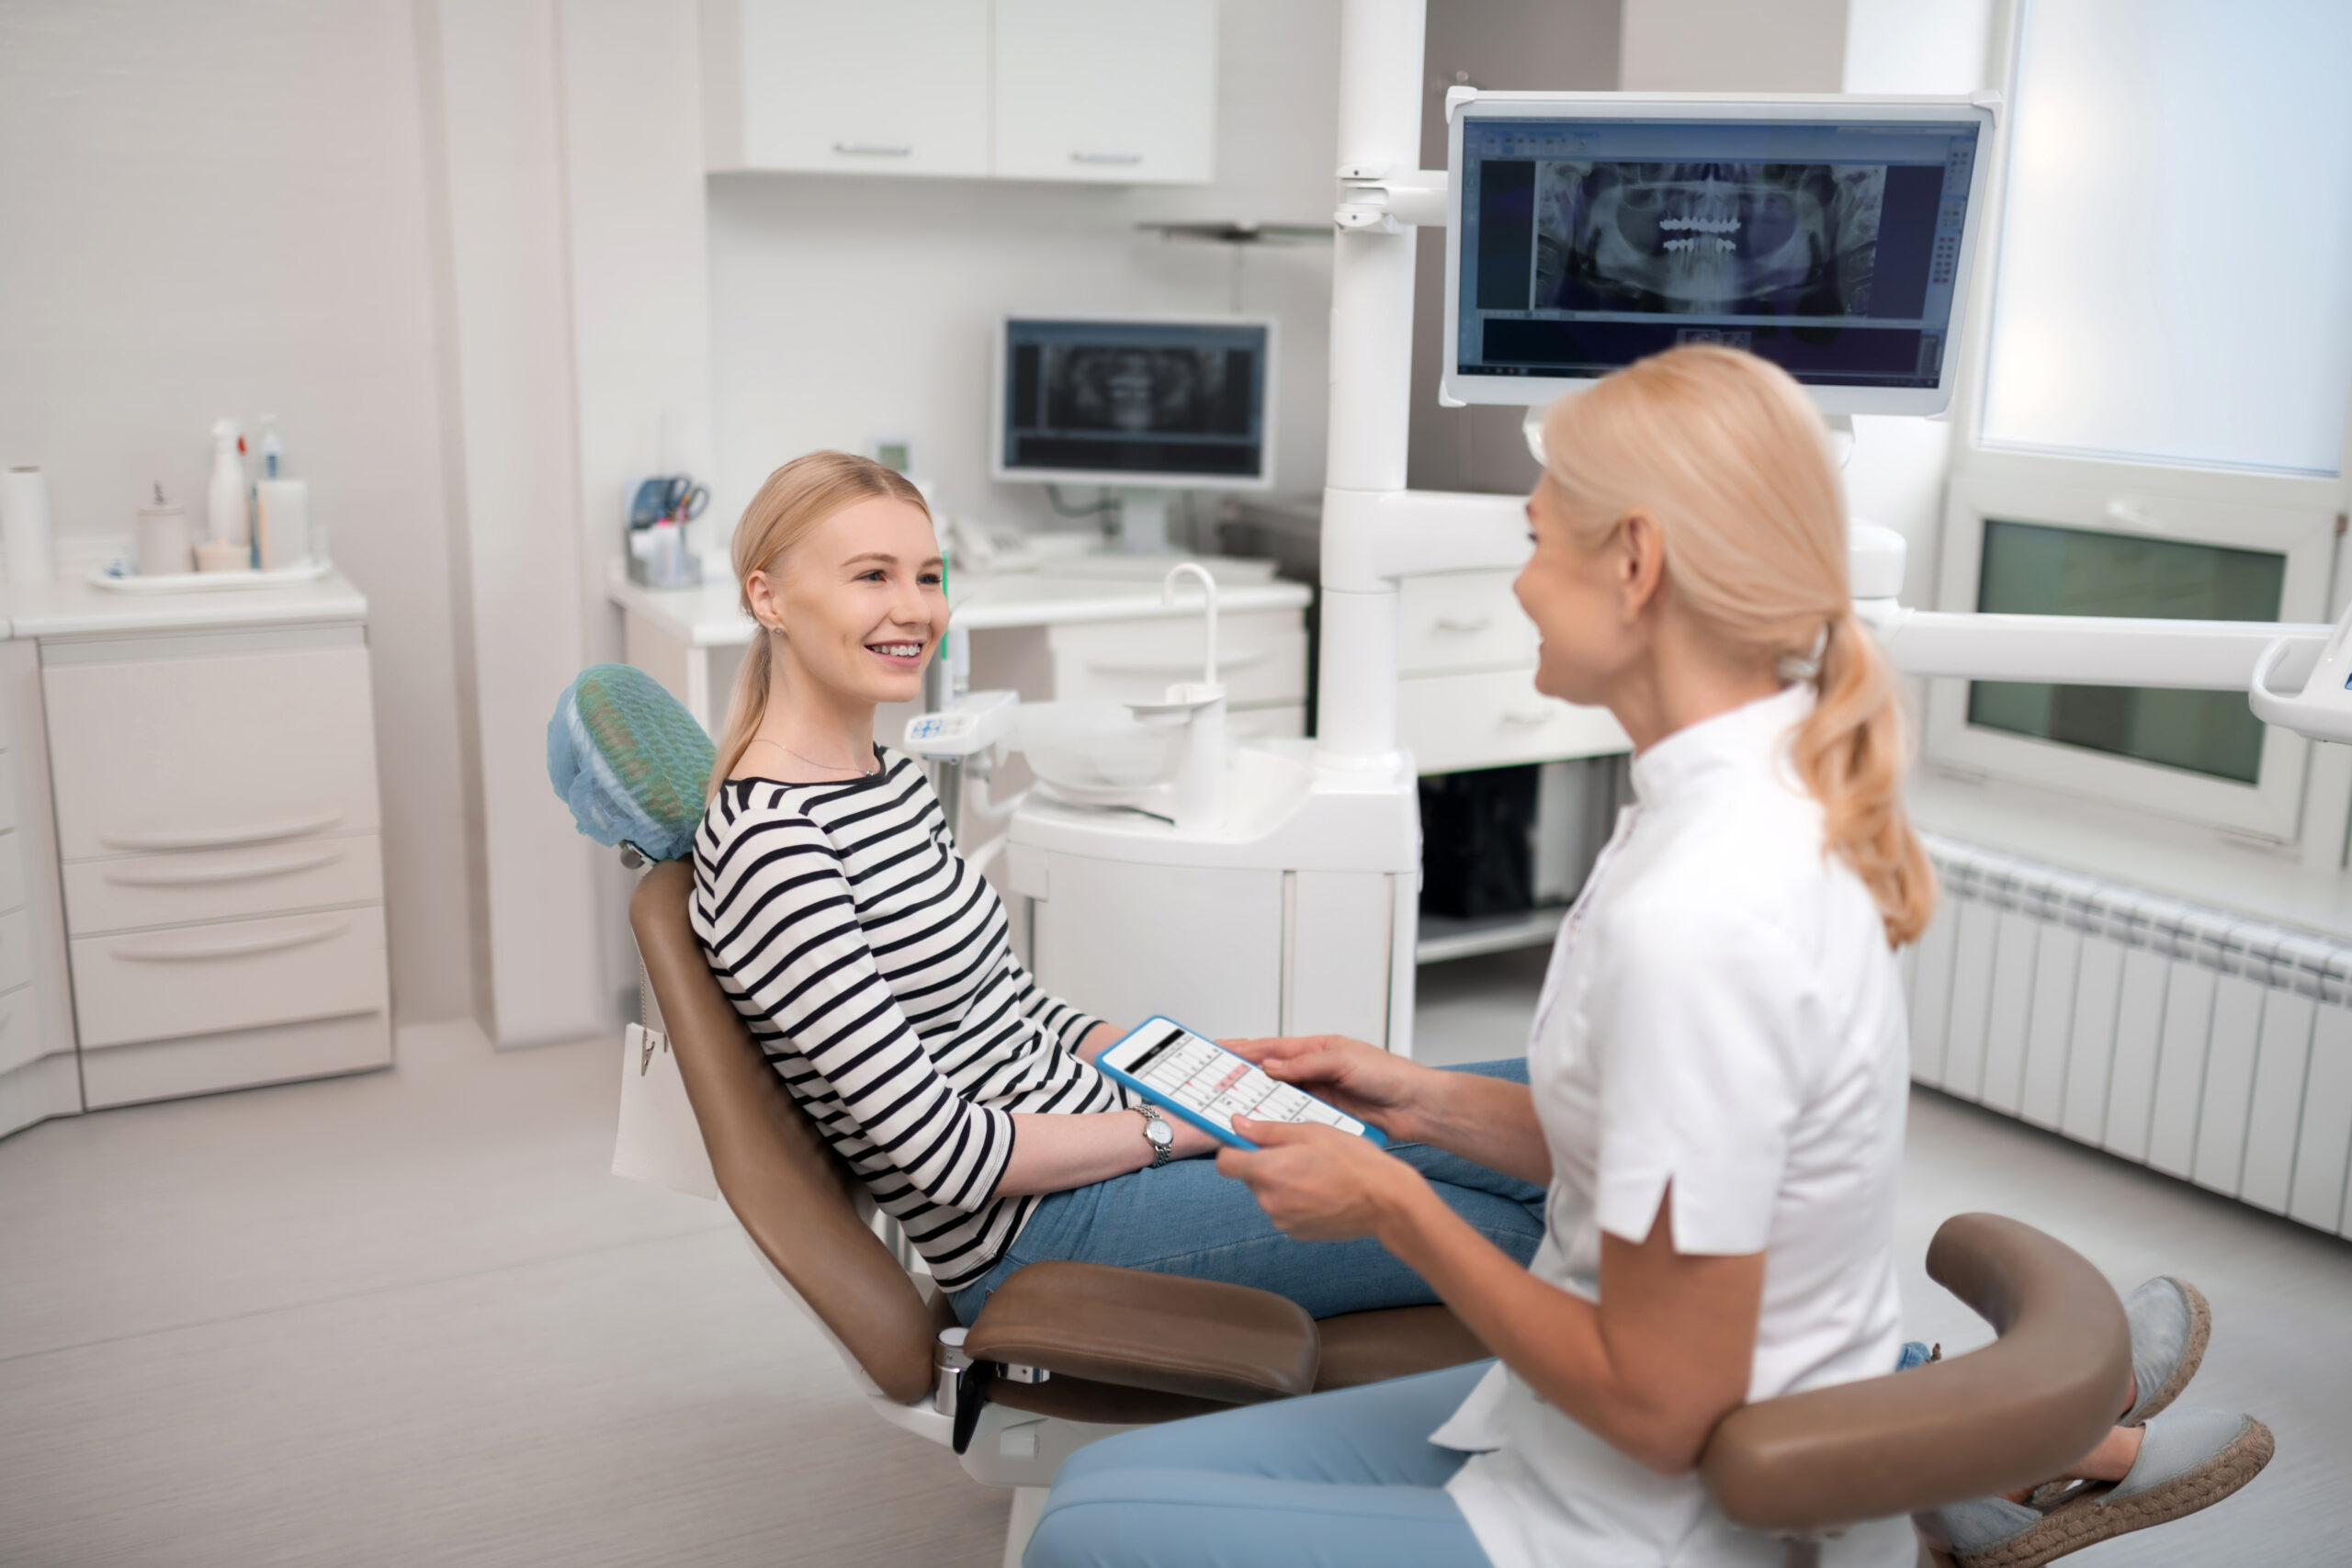 dentist consulting her patient about future appointments